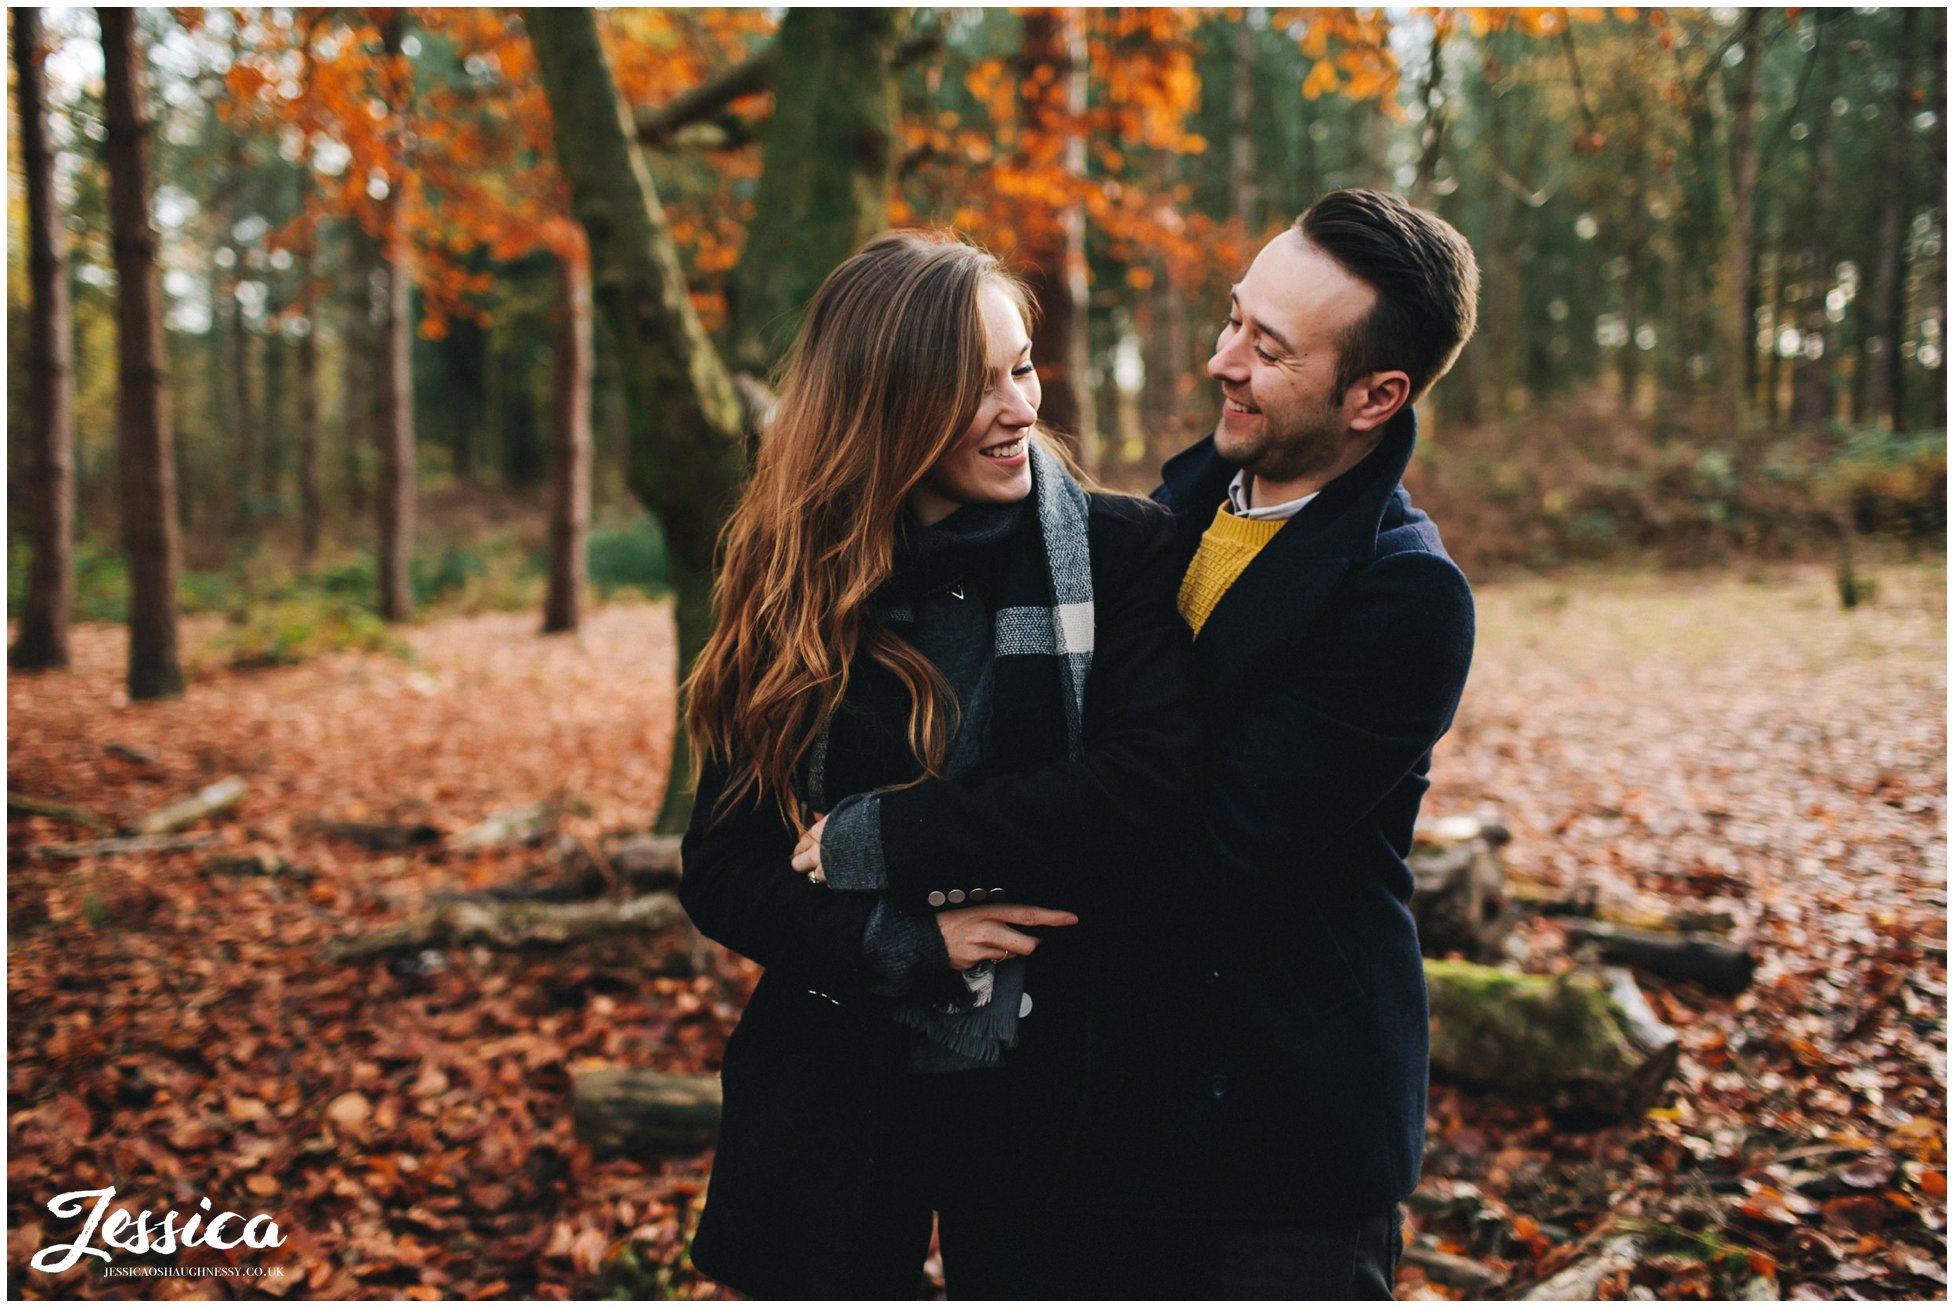 a november engagement shoot in cheshire